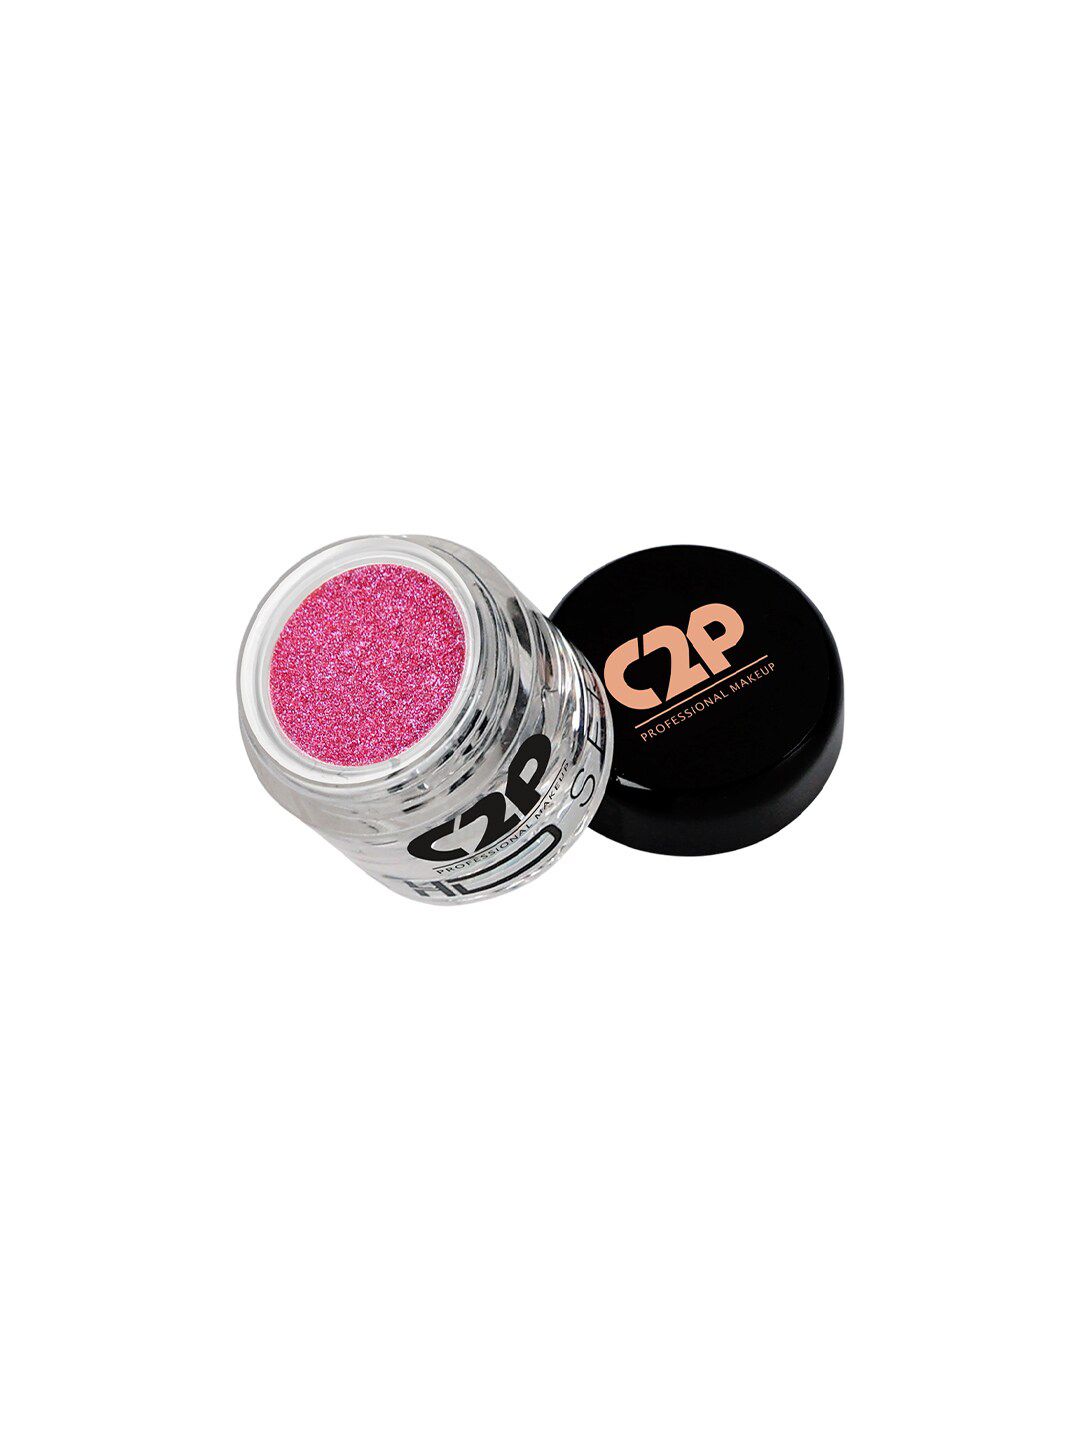 C2P PROFESSIONAL MAKEUP HD Loose Precious Pigments Eyeshadow - Pink Fox 402 Price in India